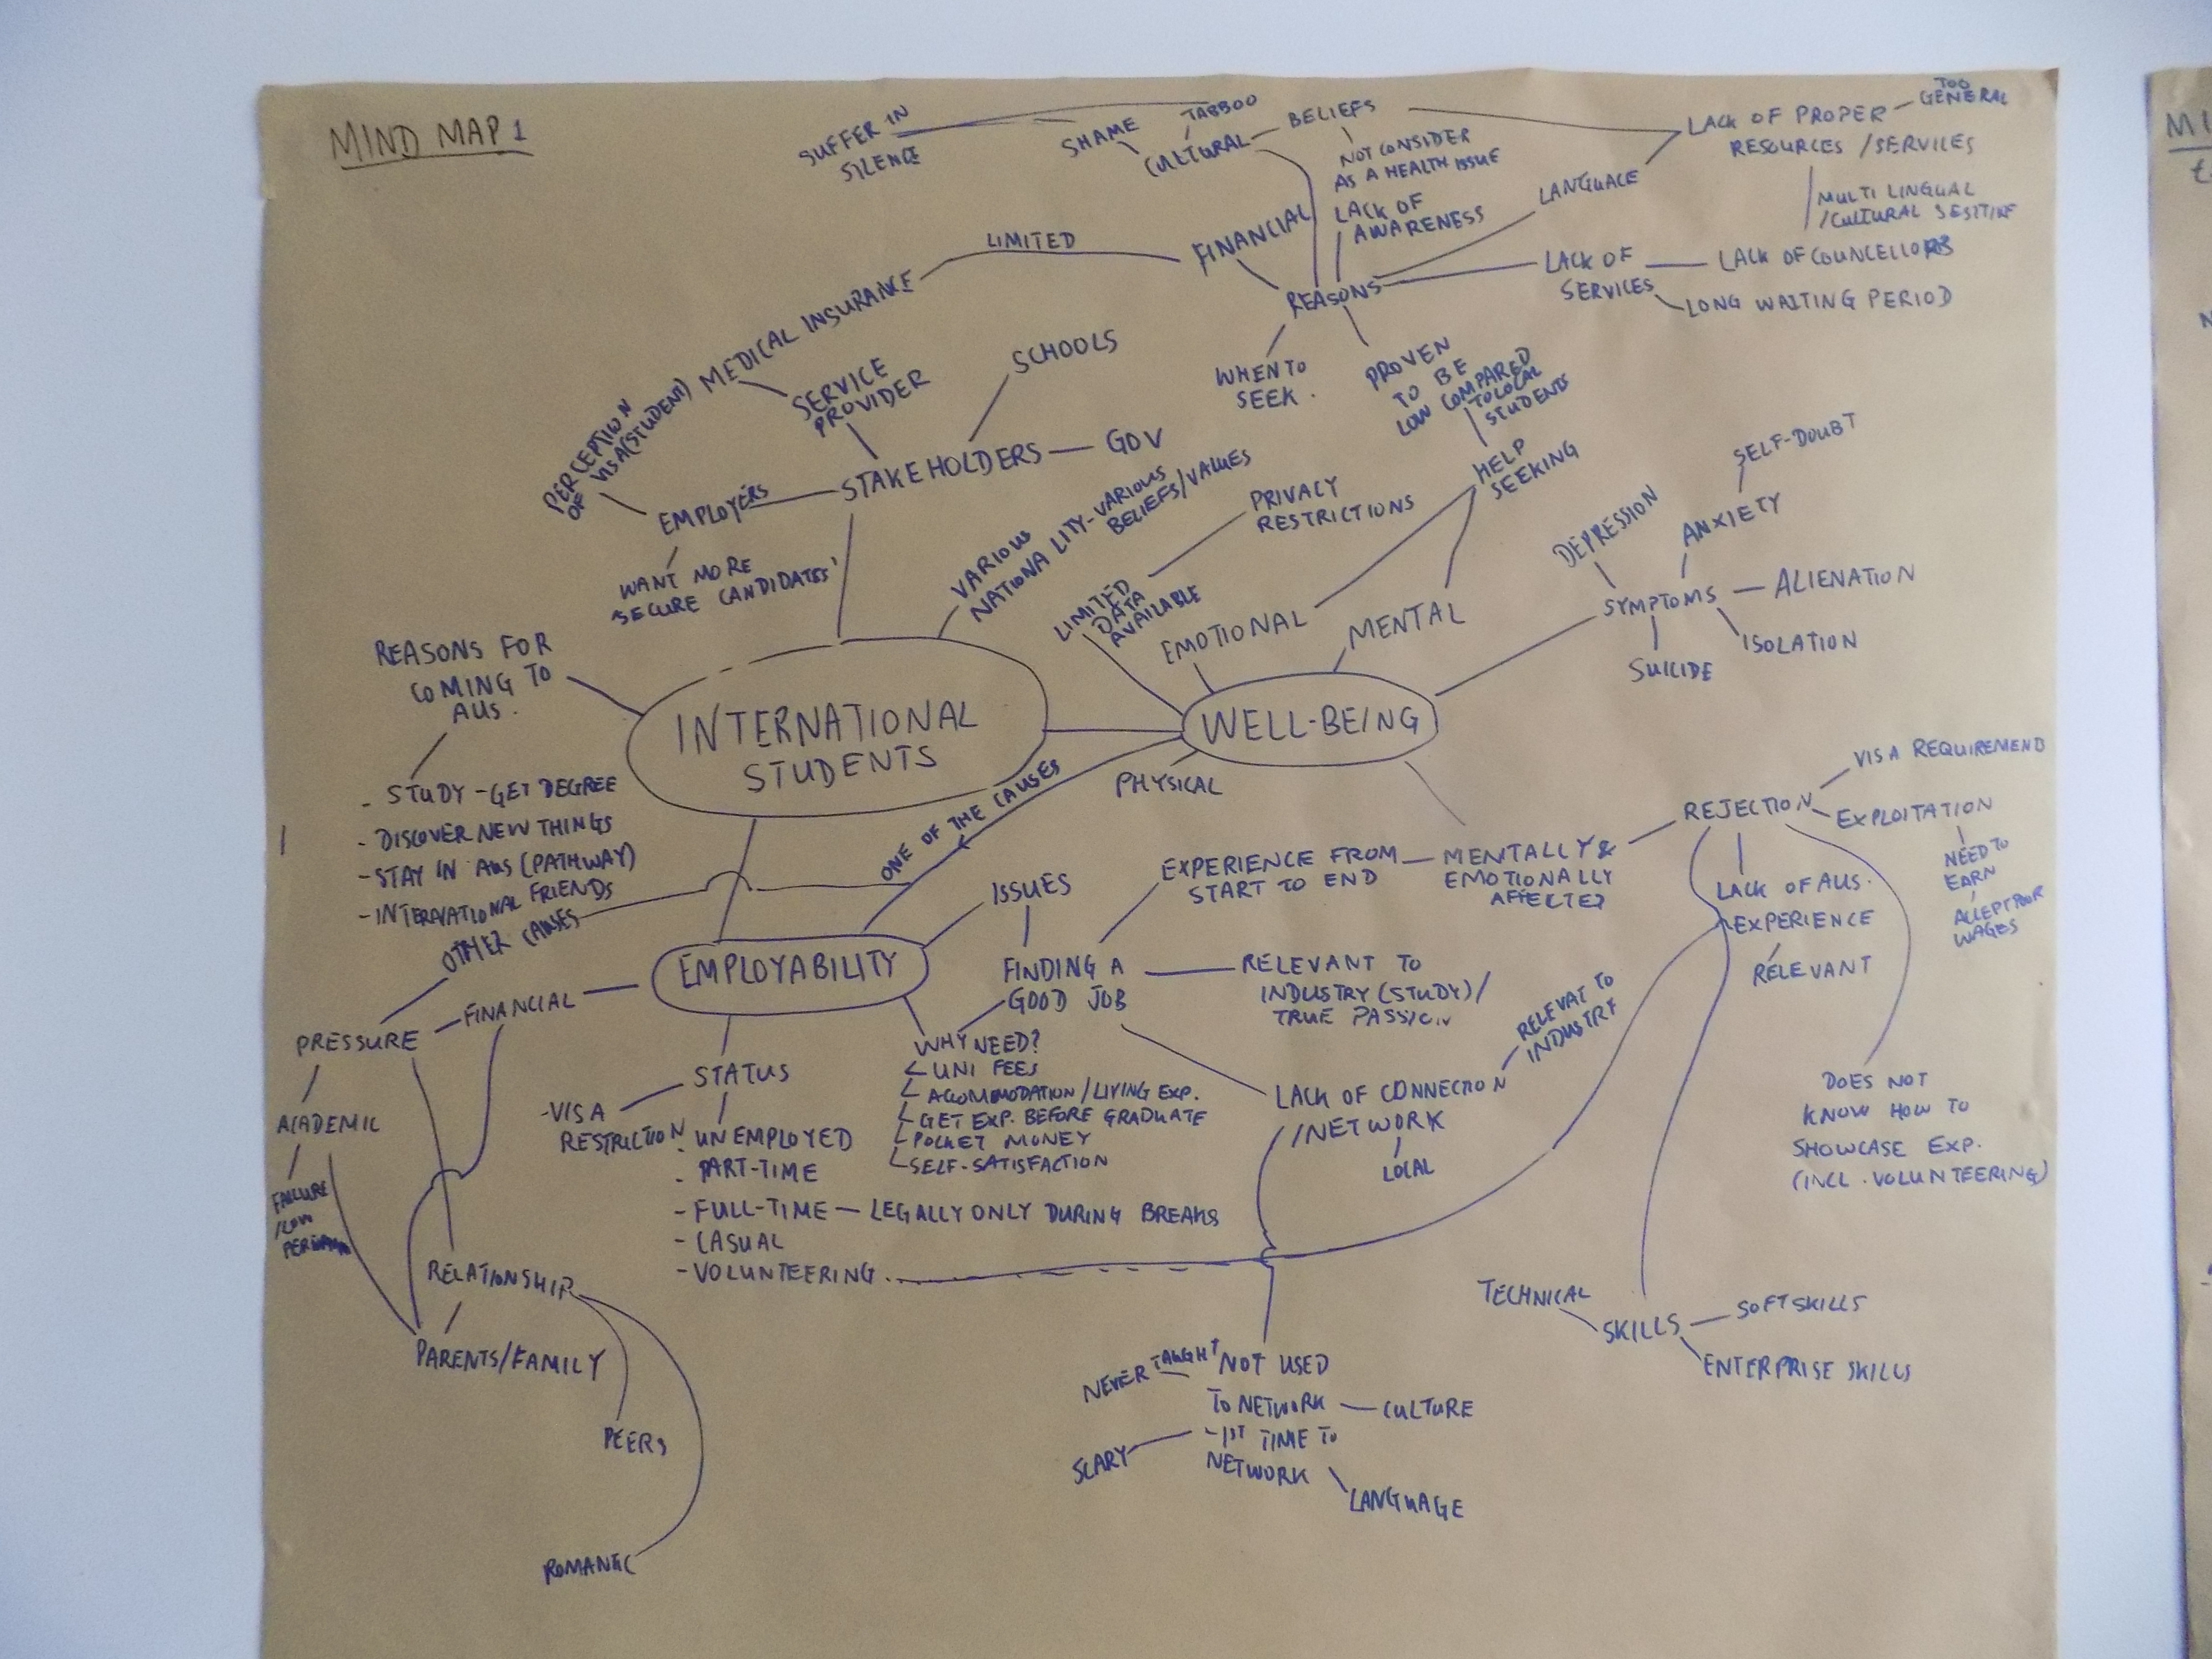 Mind-map of international students and wellbeing